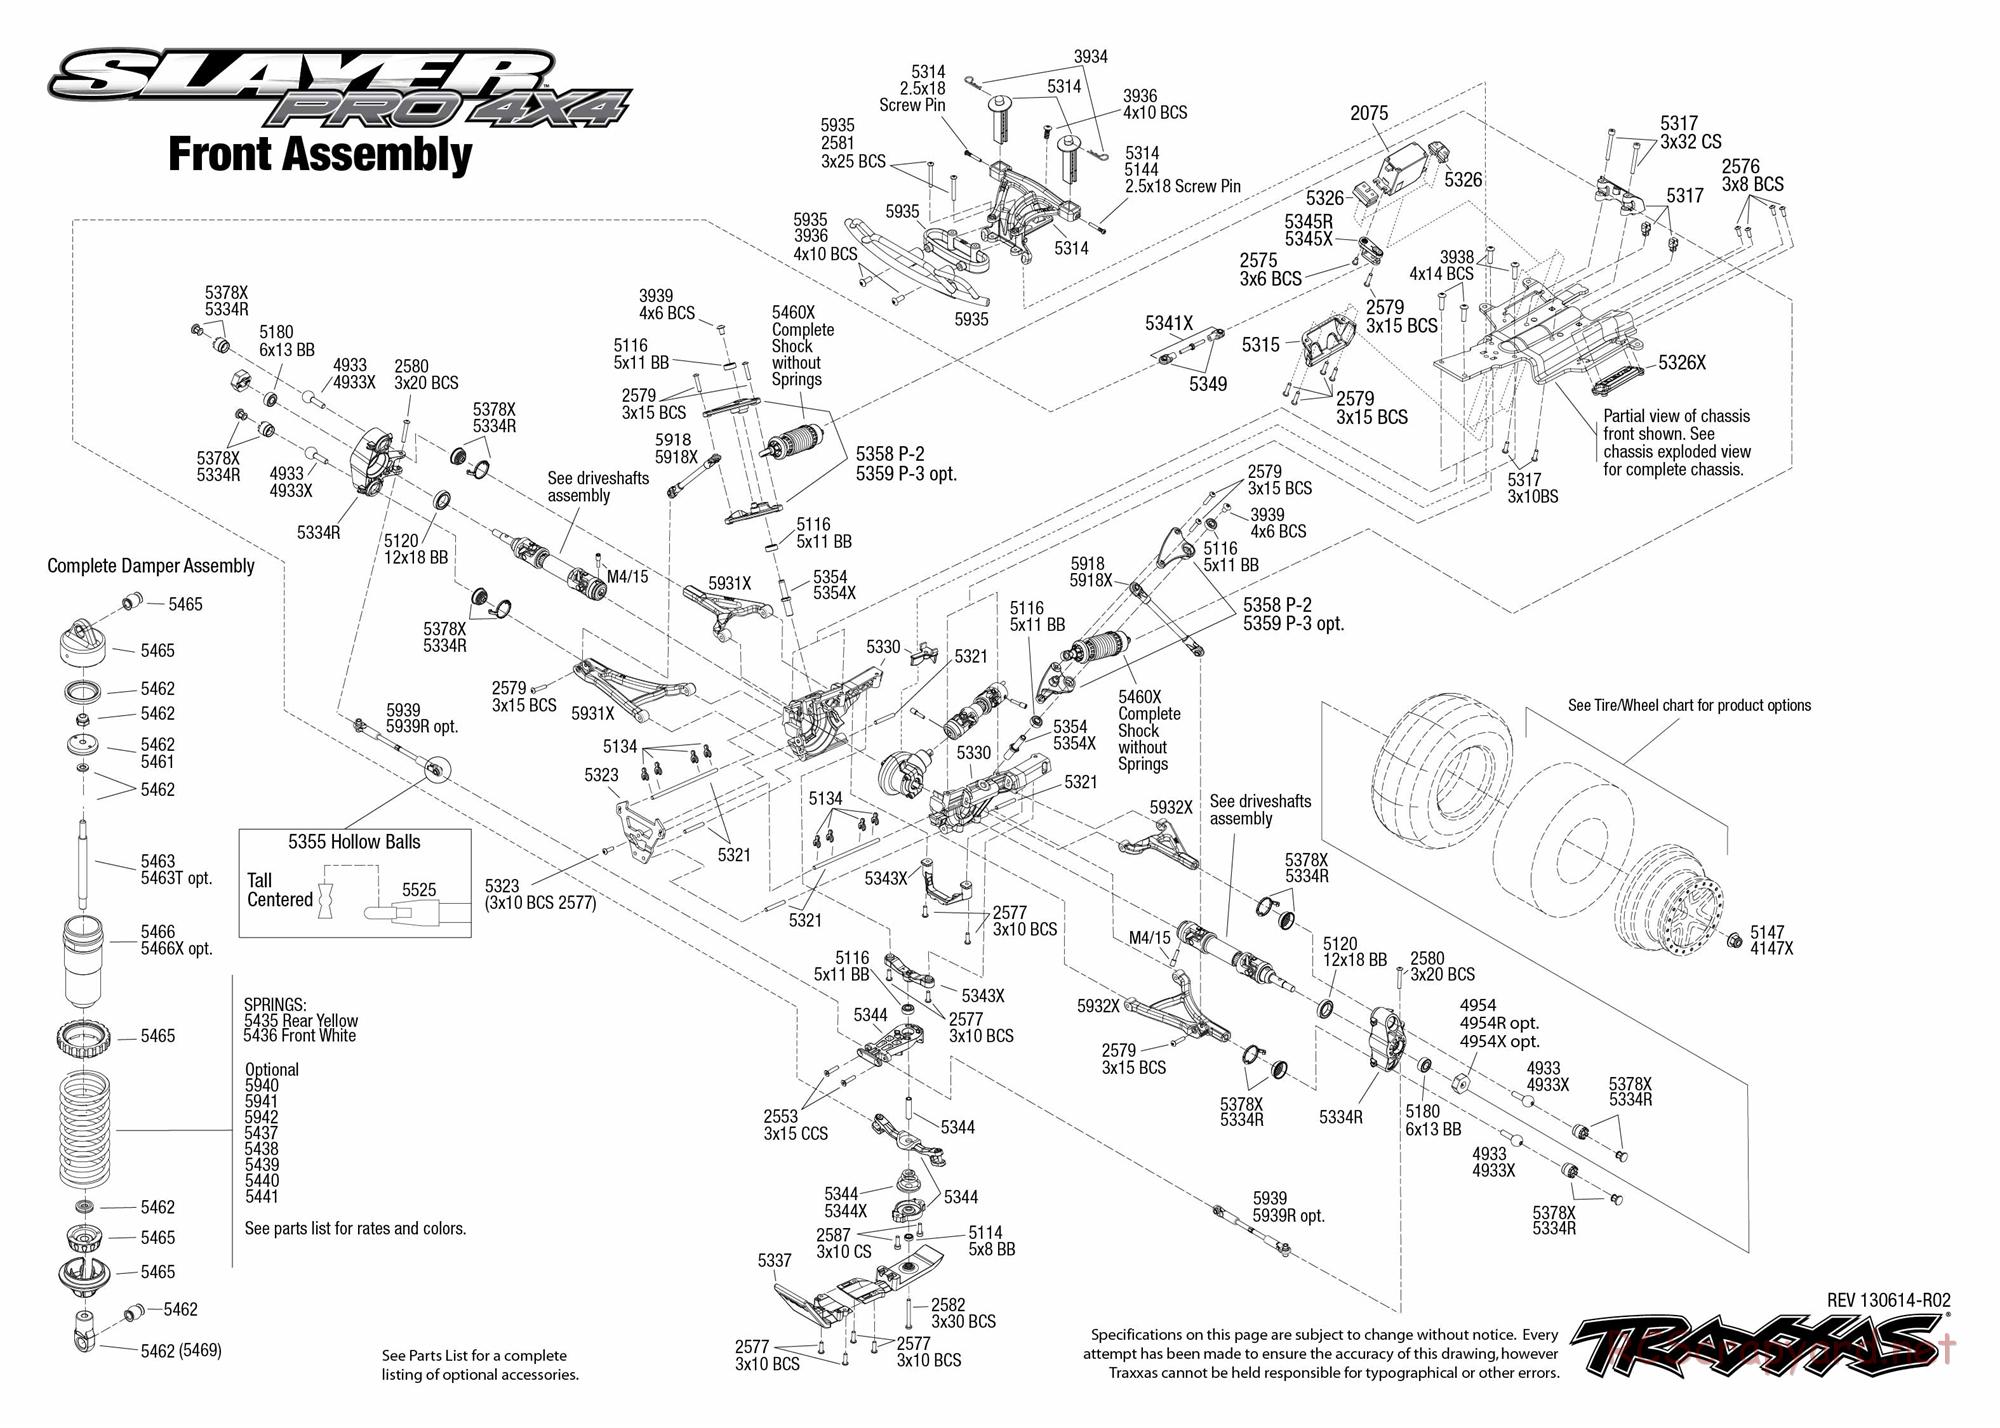 Traxxas - Slayer Pro 4x4 (2012) - Exploded Views - Page 4